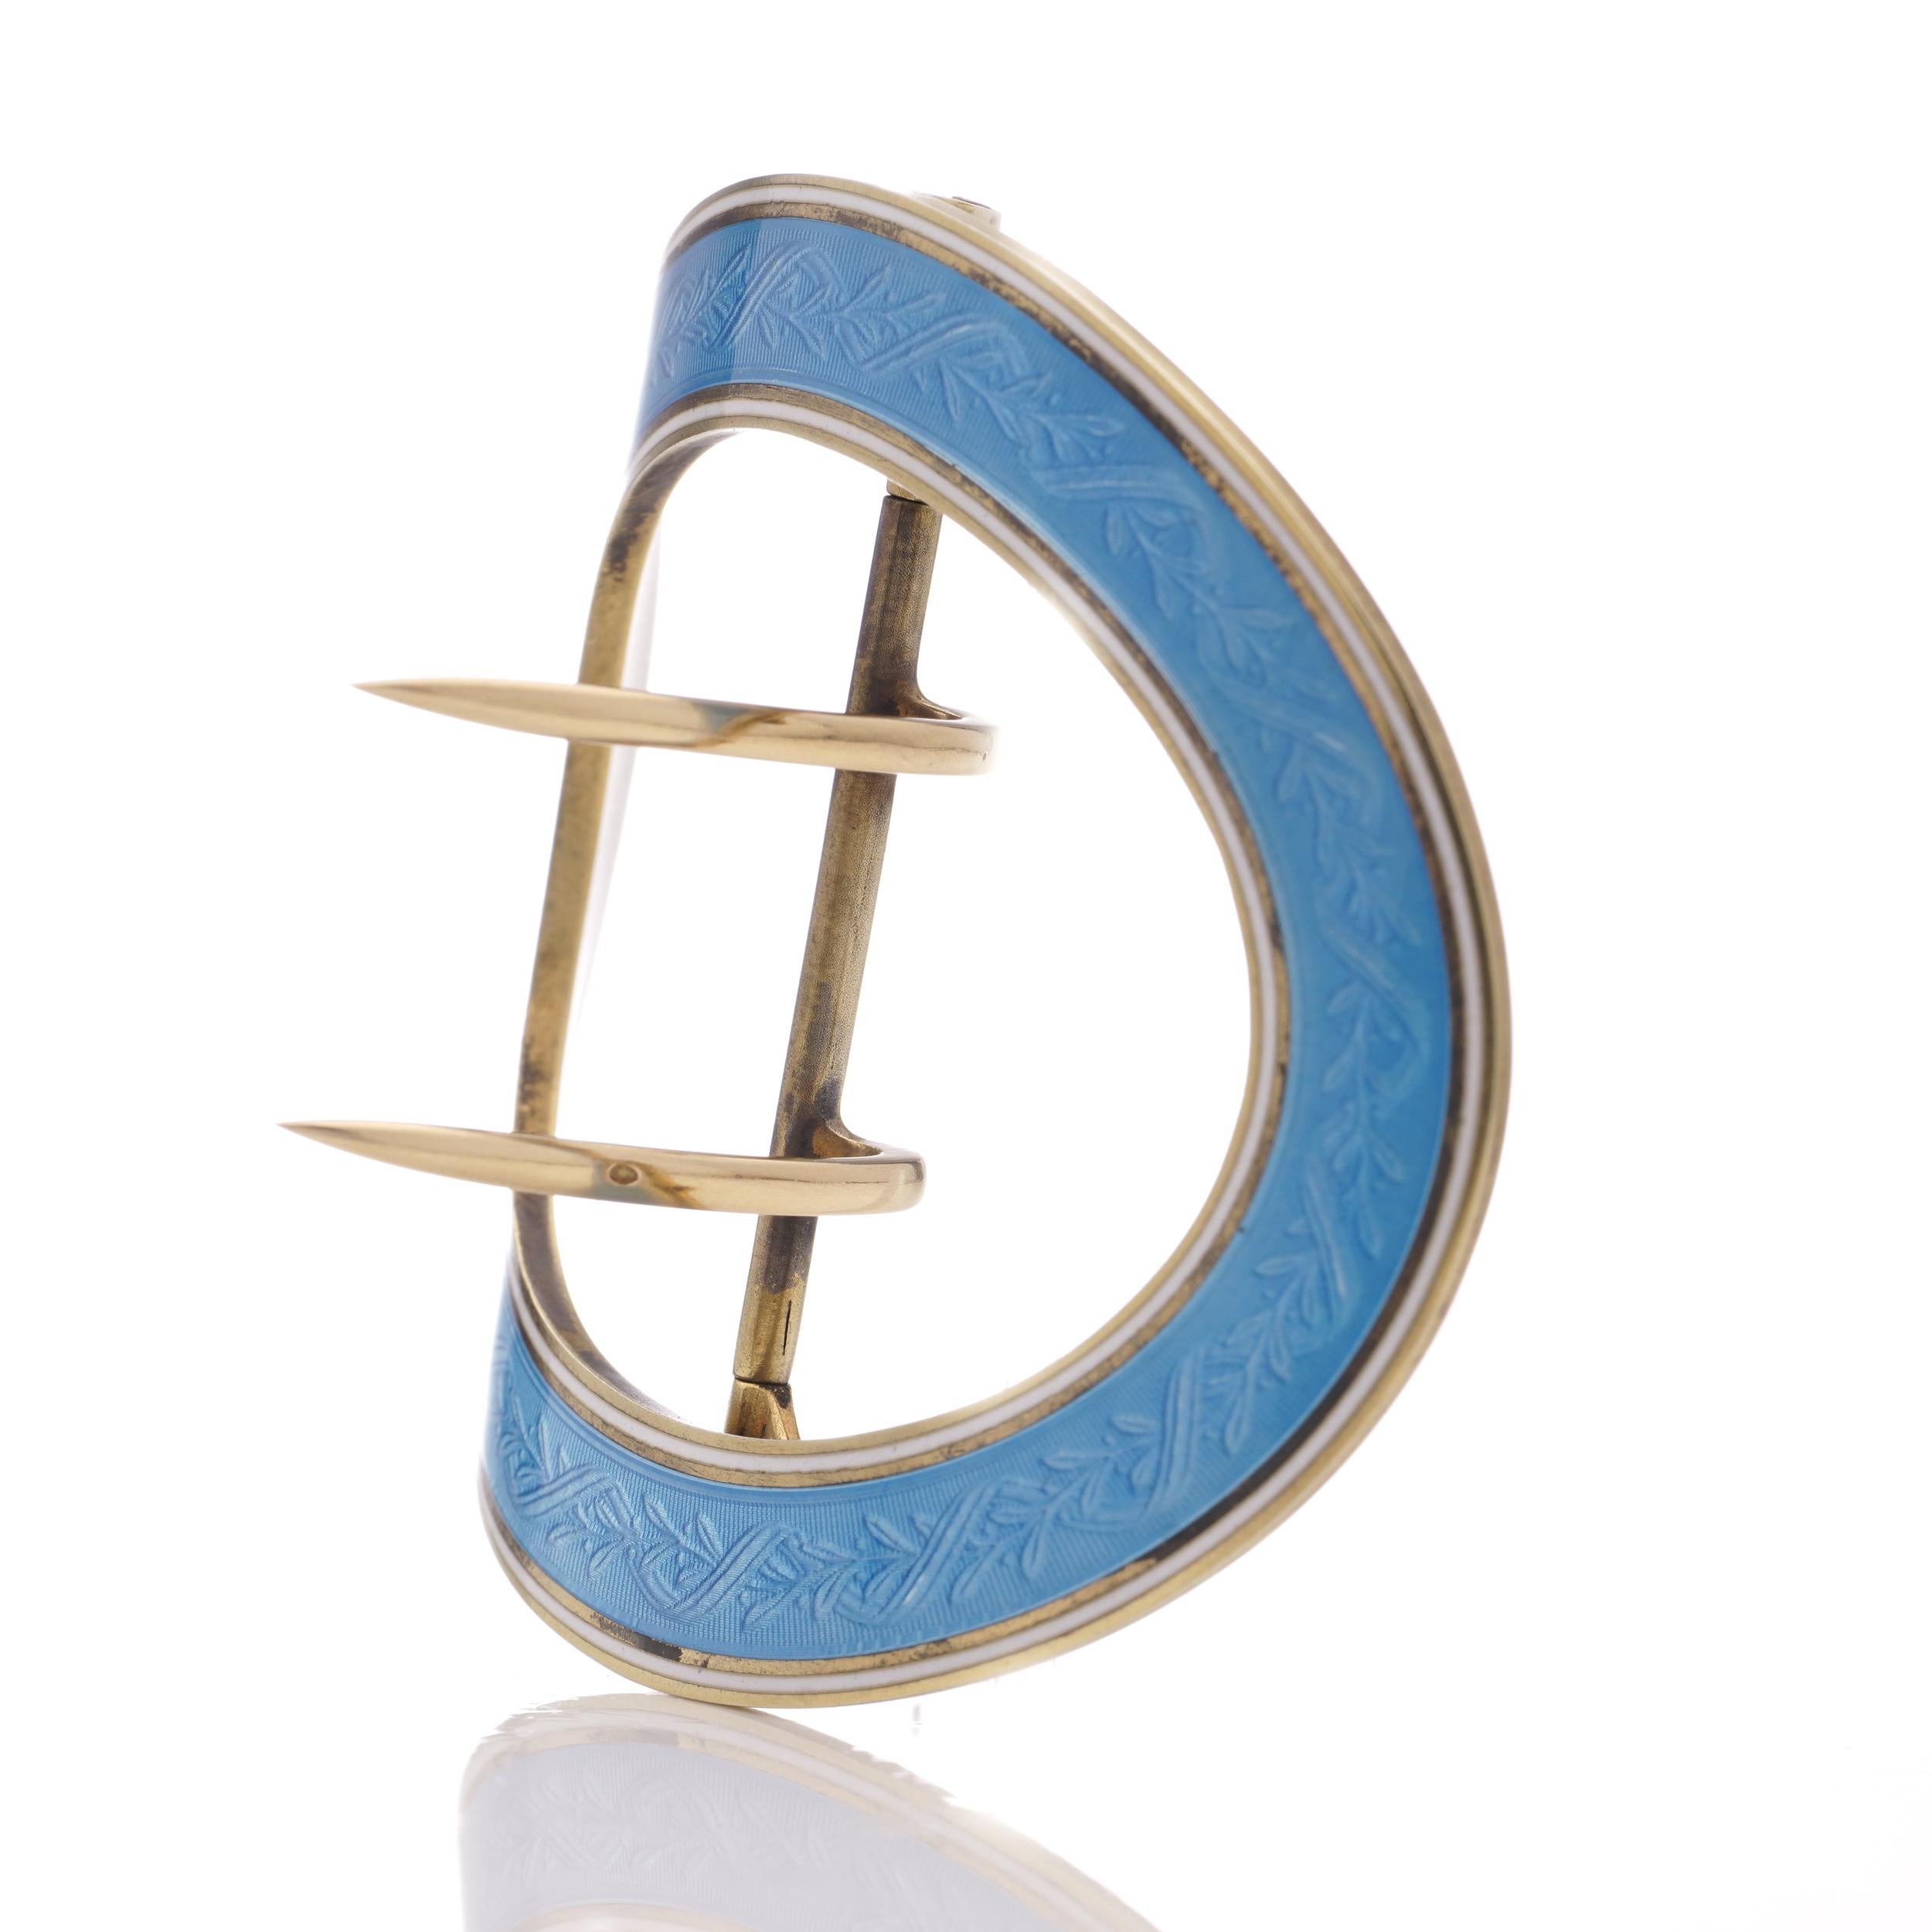 Late 19th century French 800. silver and blue enamel belt buckle For Sale 1